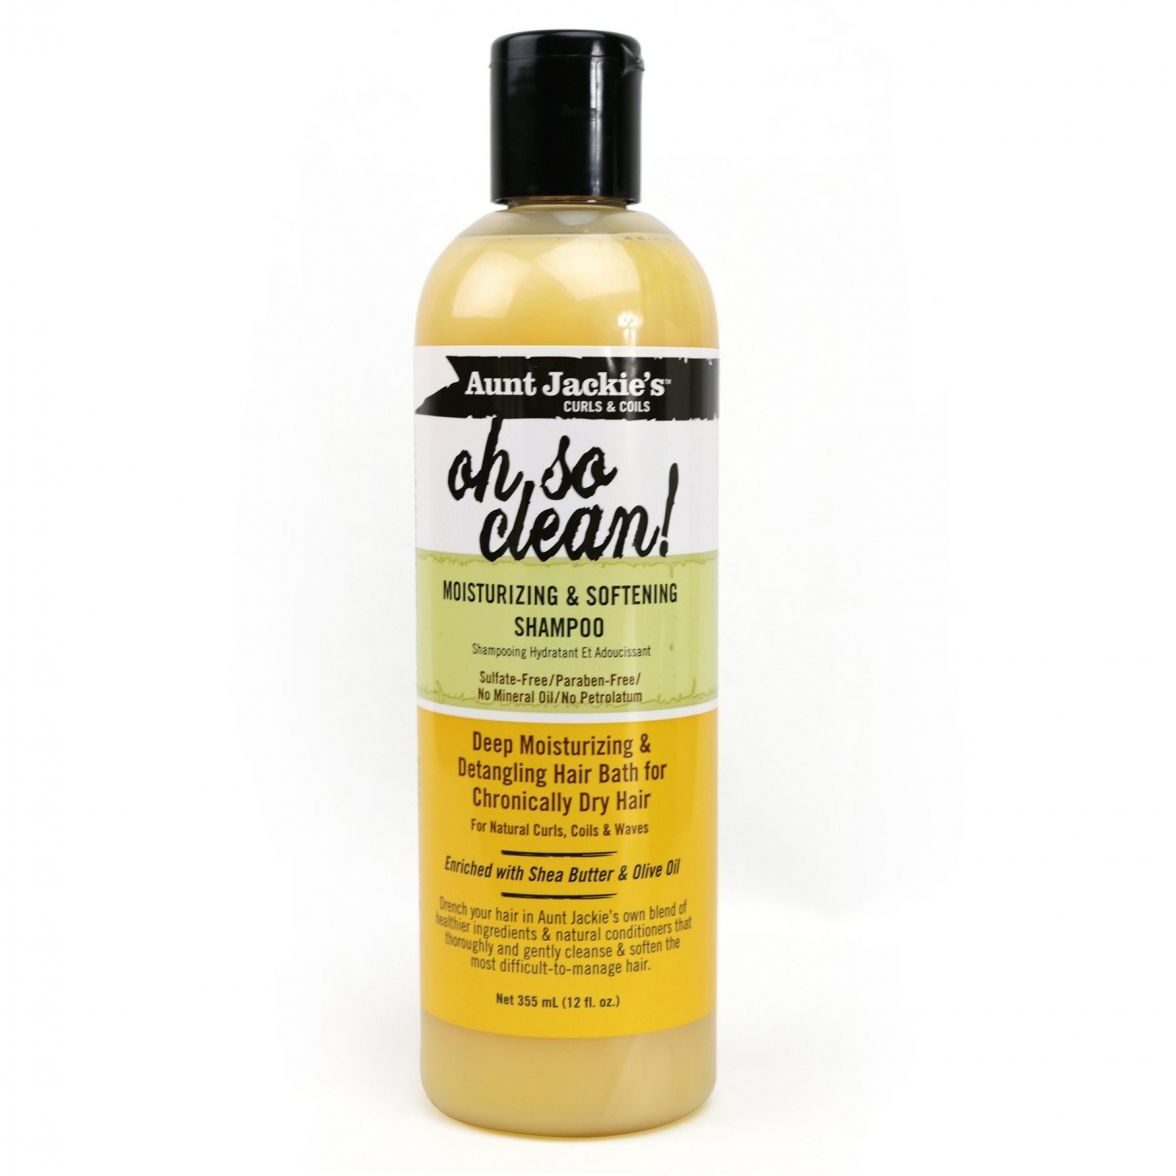 AUNT JACKIE'S CURLS & COILS OH SO CLEAN! Moisturizing & Softing Shampoo 355m